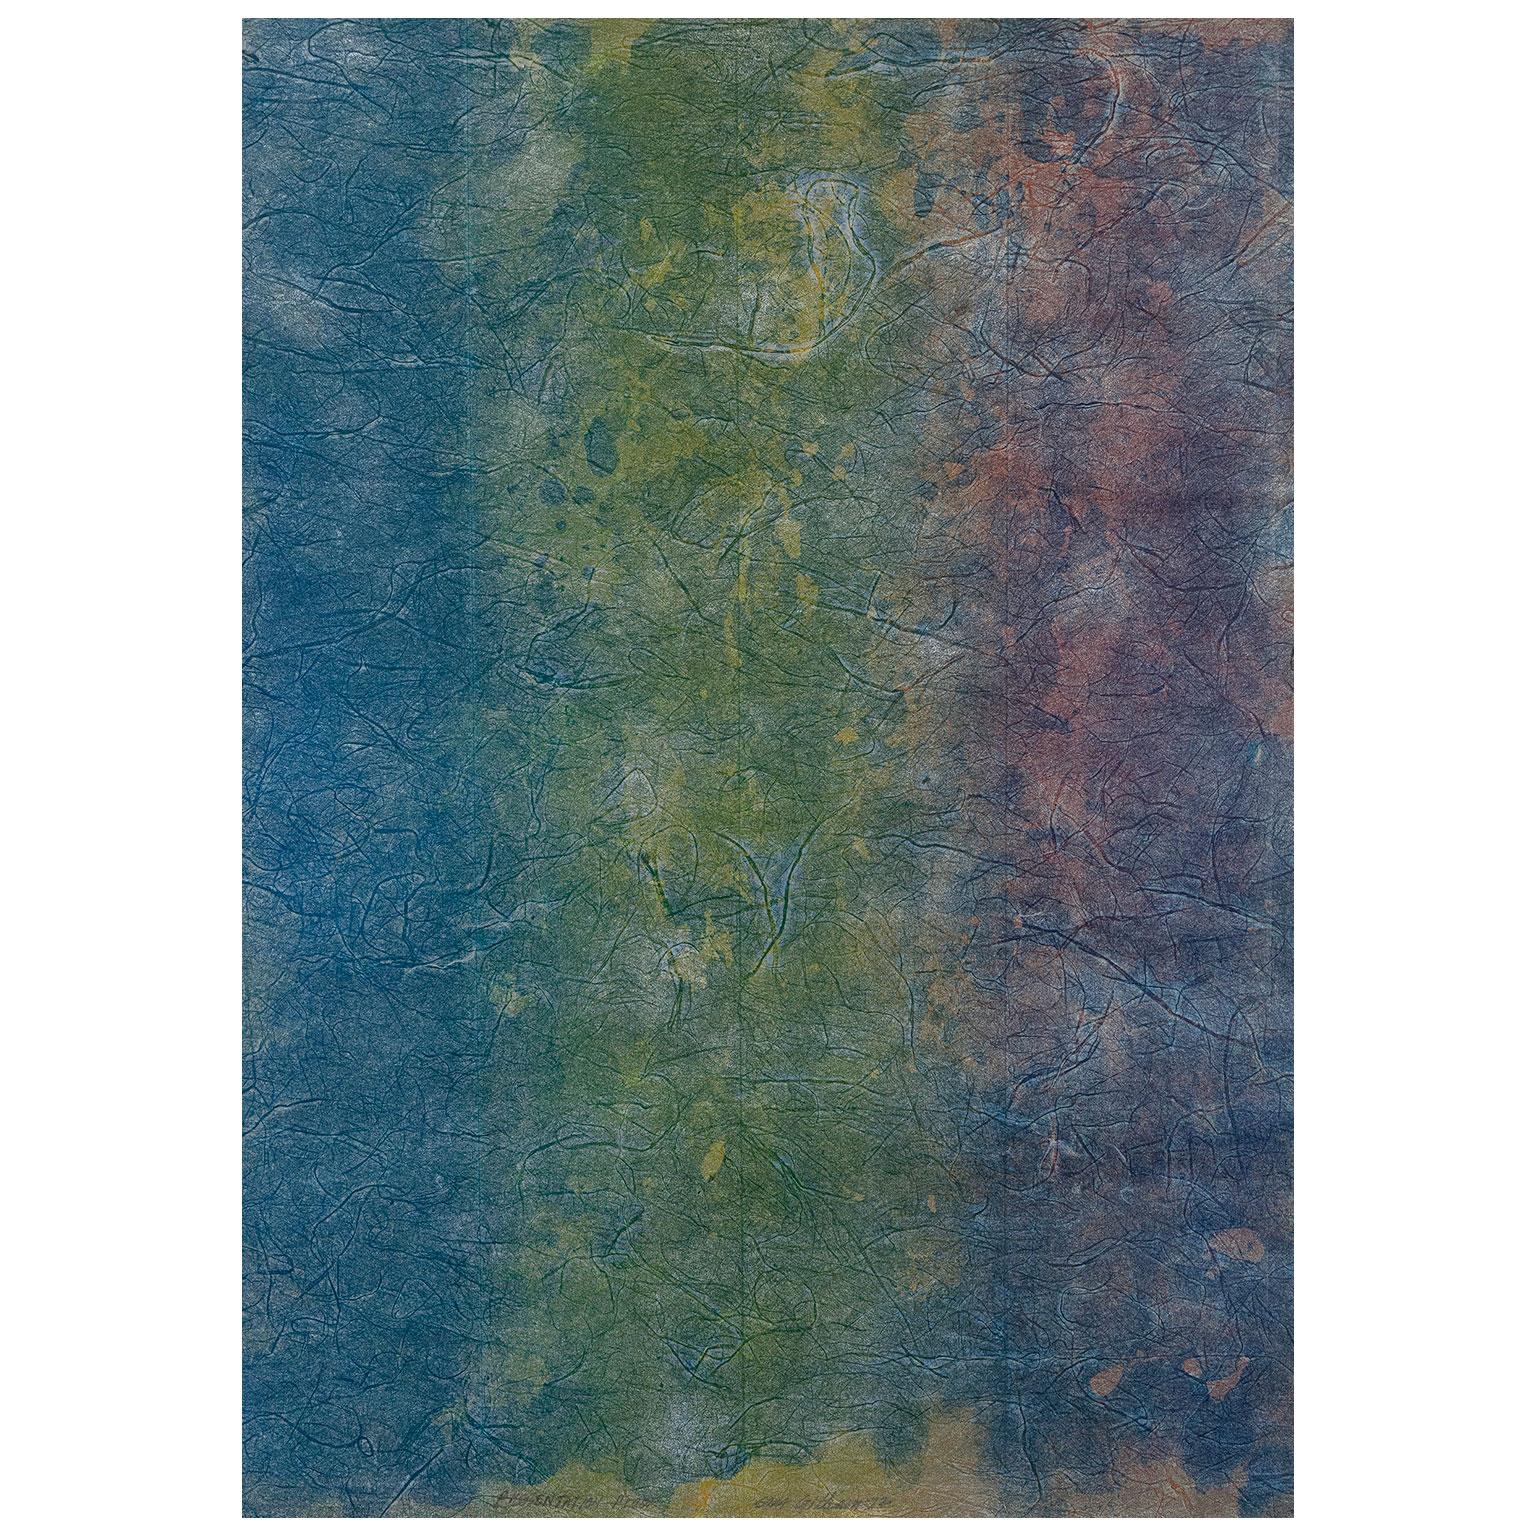 Sam Gilliam (b. 1933) is one of America’s most prominent abstract painters.

Initially associated with the color-field painters in Washington DC, Gilliam has had lengthy and dynamic career introducing ground-breaking techniques throughout his long